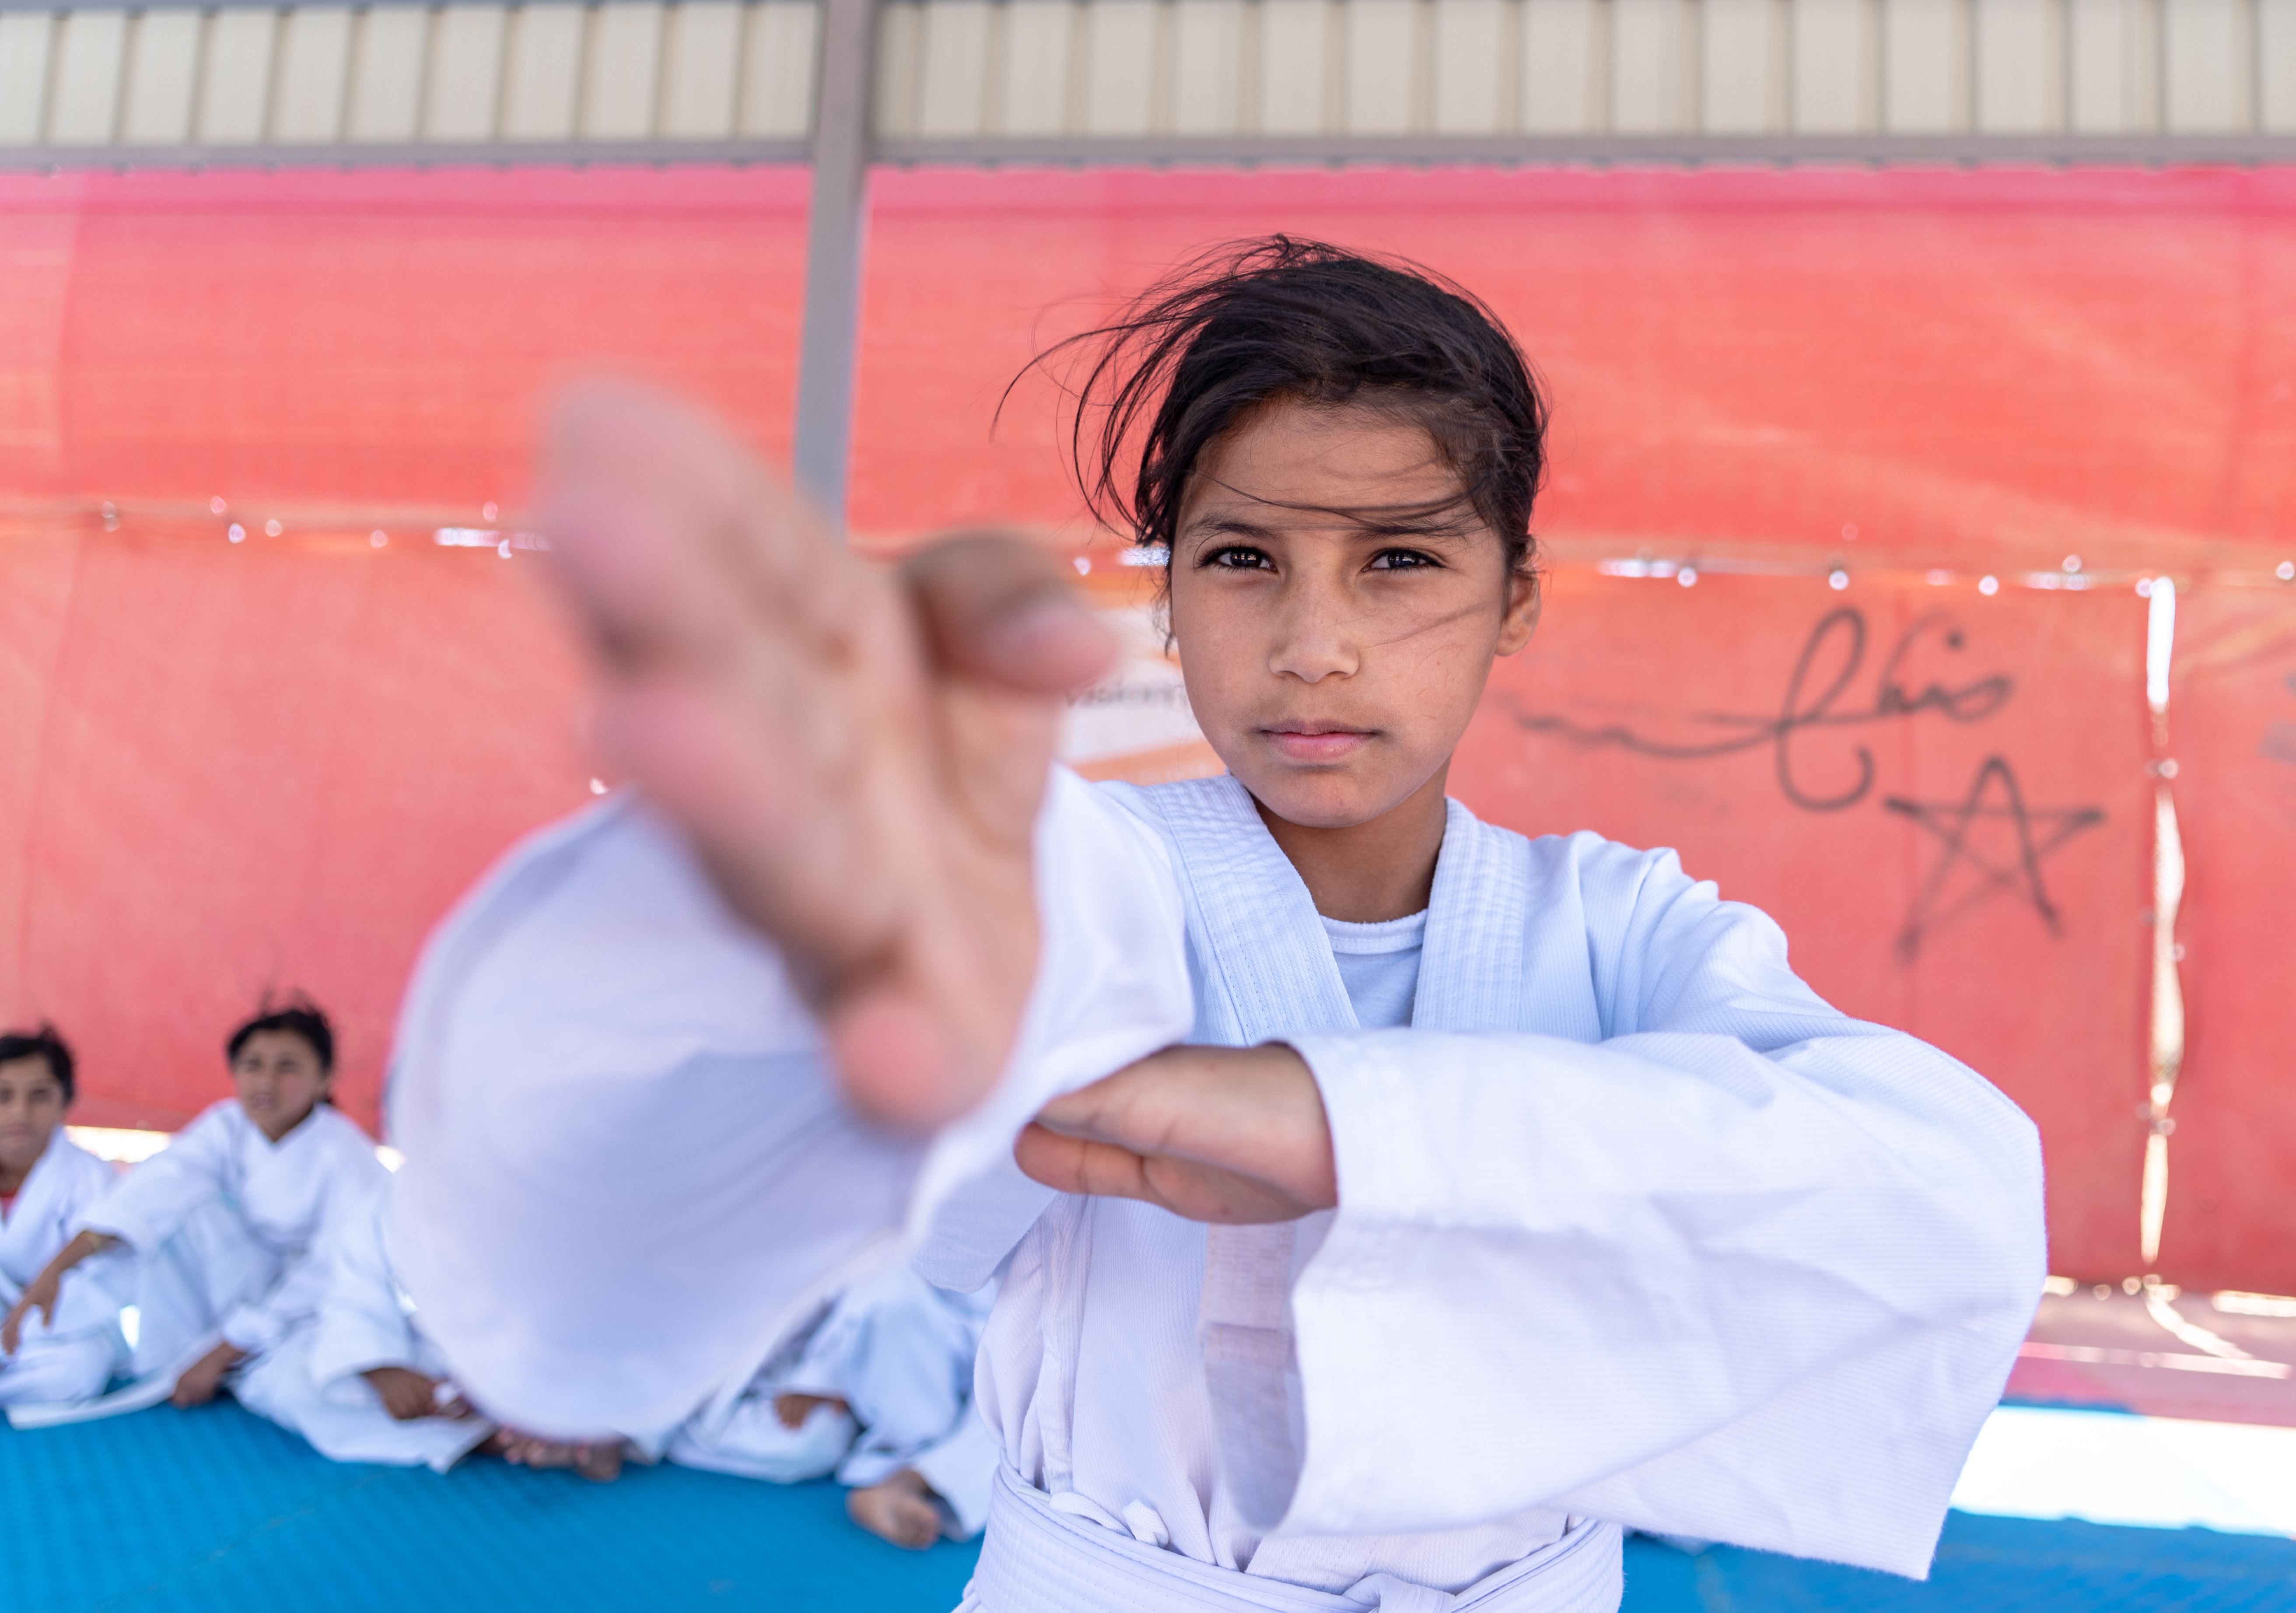 A Syrian girl shows her technique to the camera as she takes part in a karate class in Jordan's Azraq refugee camp